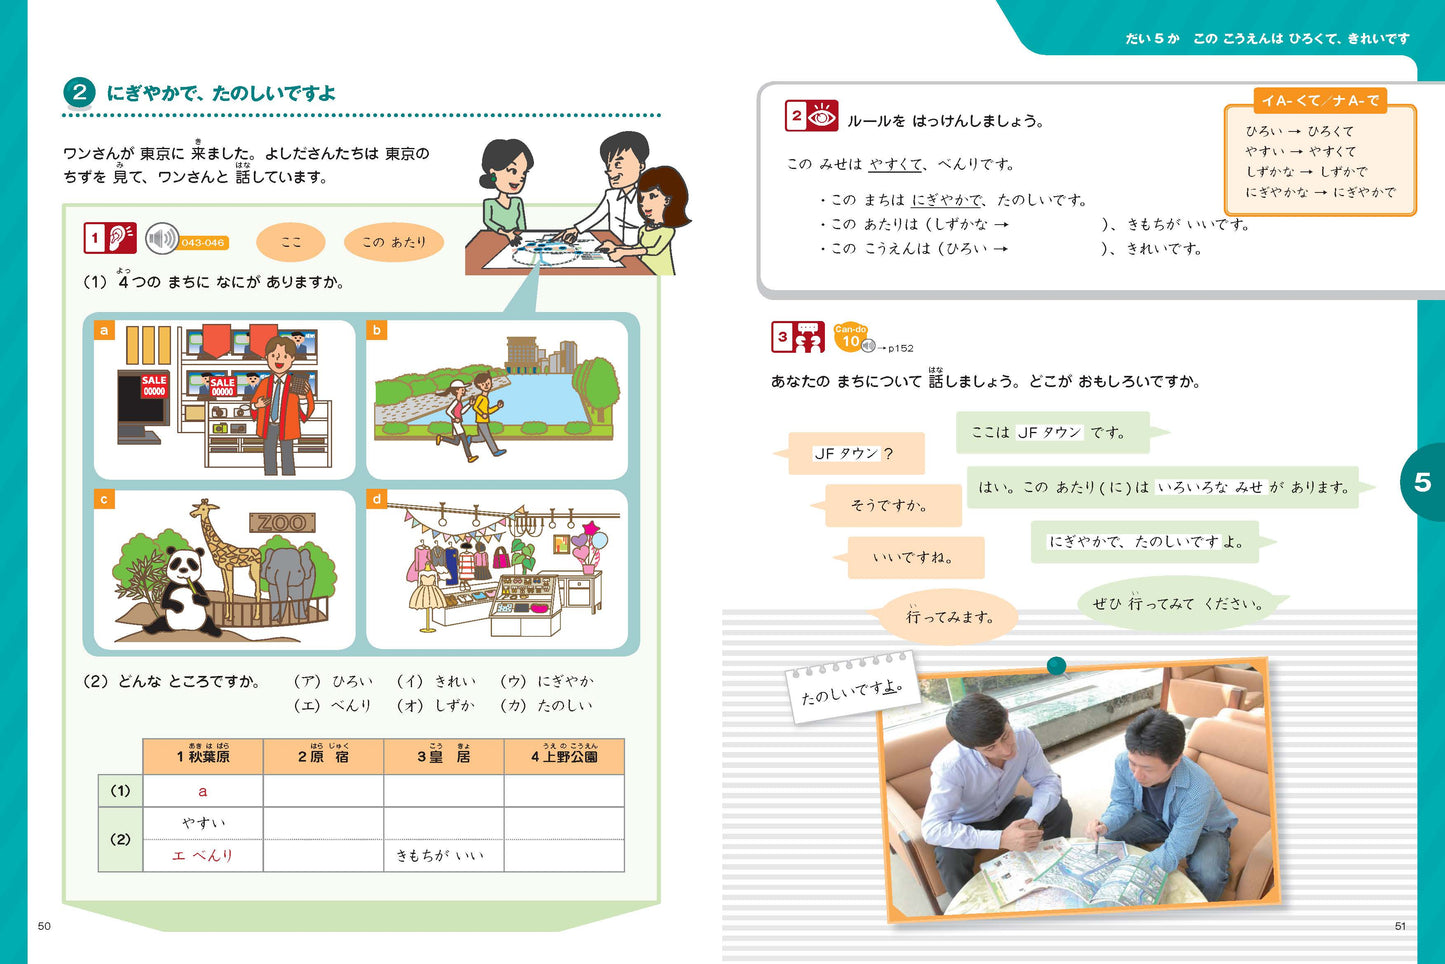 Marugoto: Japanese language and culture Elementary1 A2 Coursebook for communicative language activities "Katsudoo"